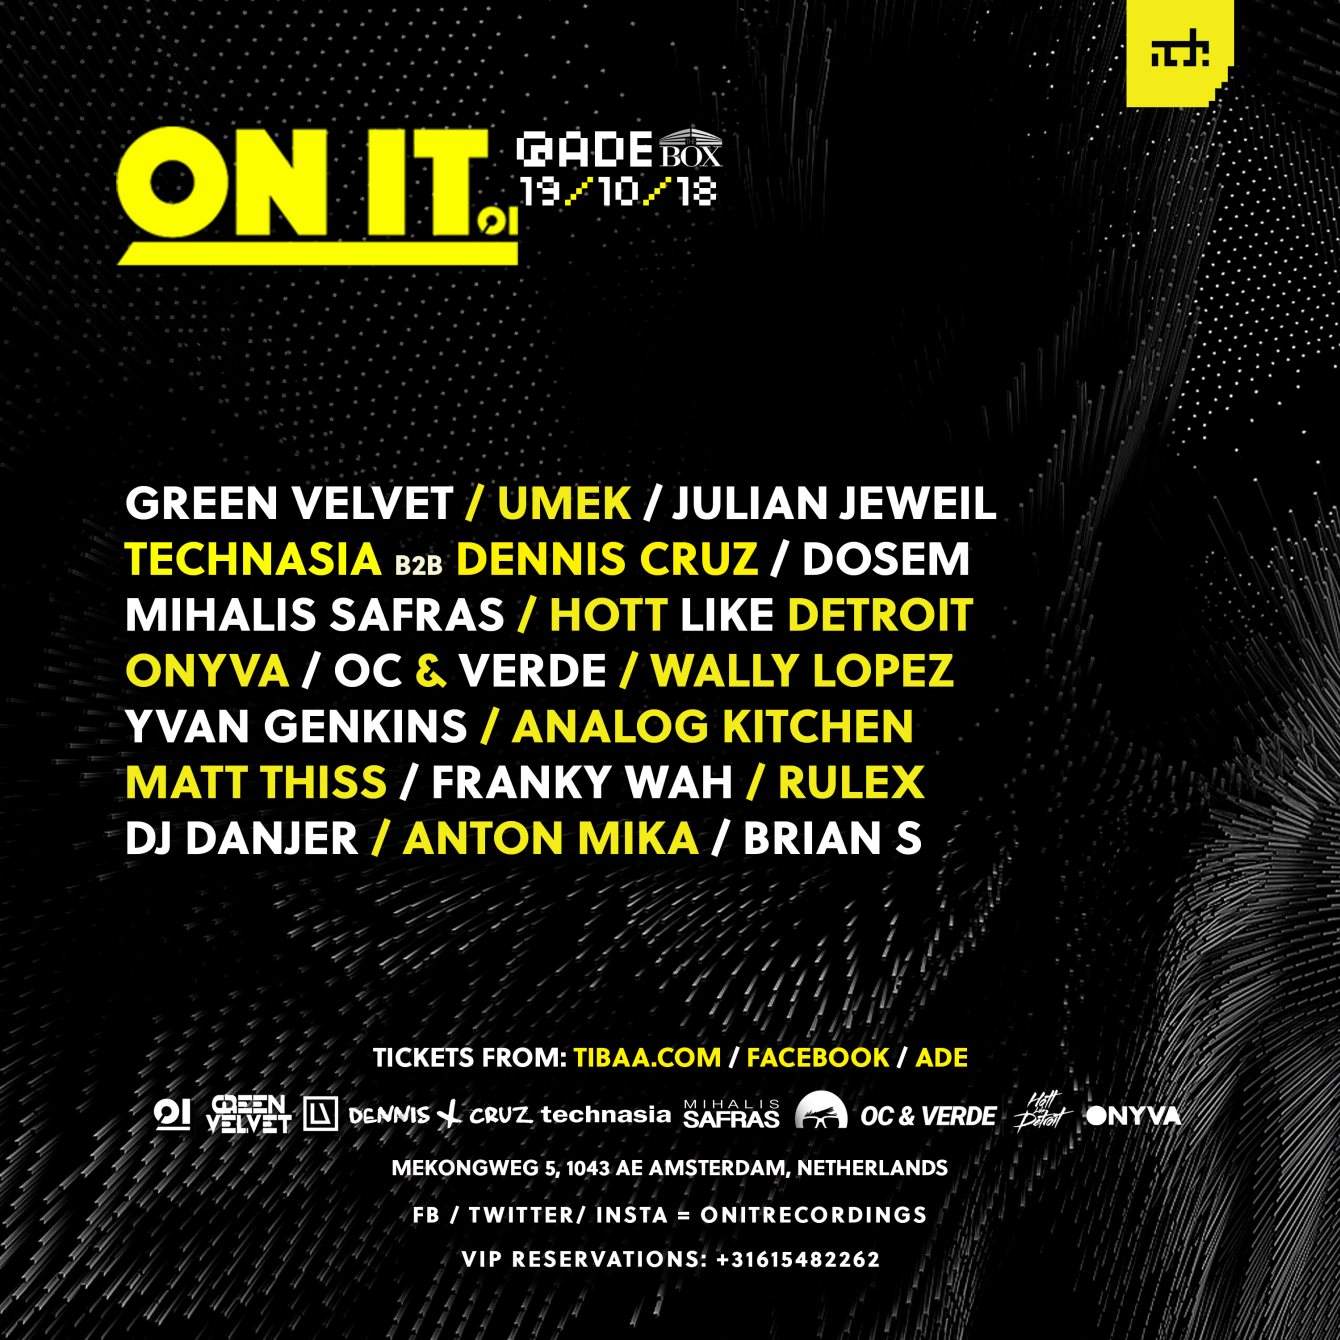 ON IT at ADE - フライヤー表